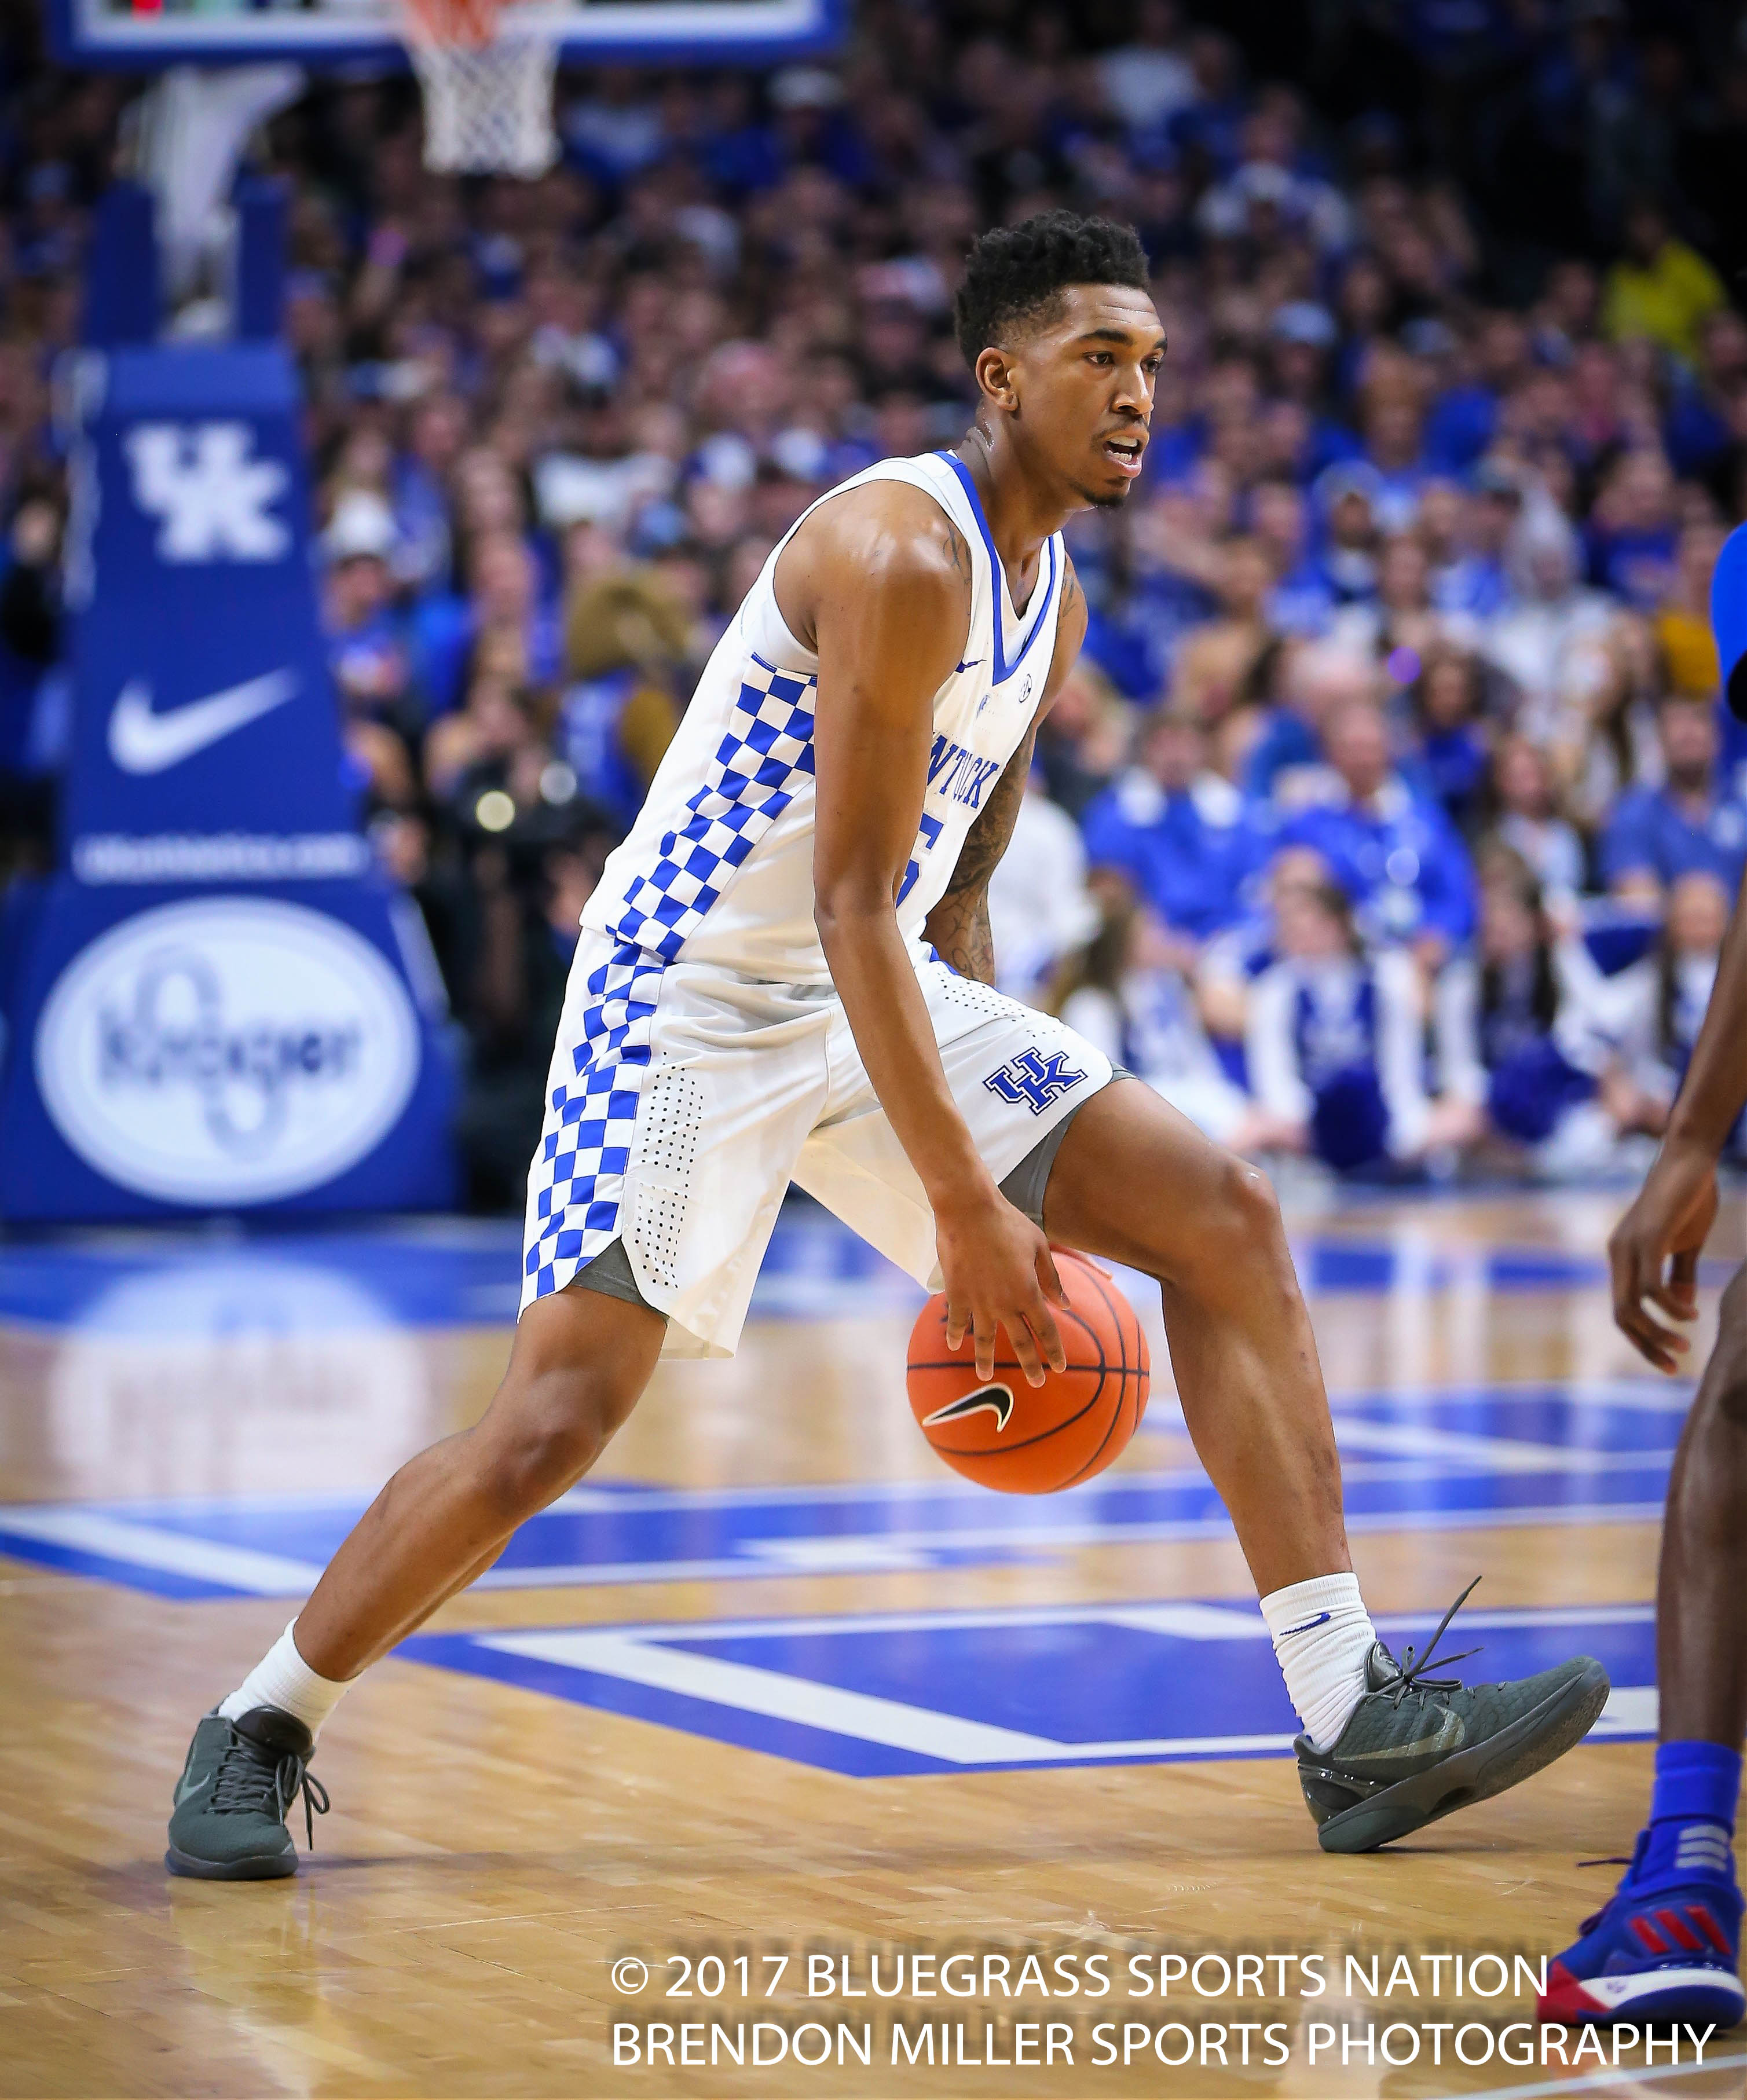 UK dropped another lackadaisical performance to Kansas - Photo by Brendon Miller 